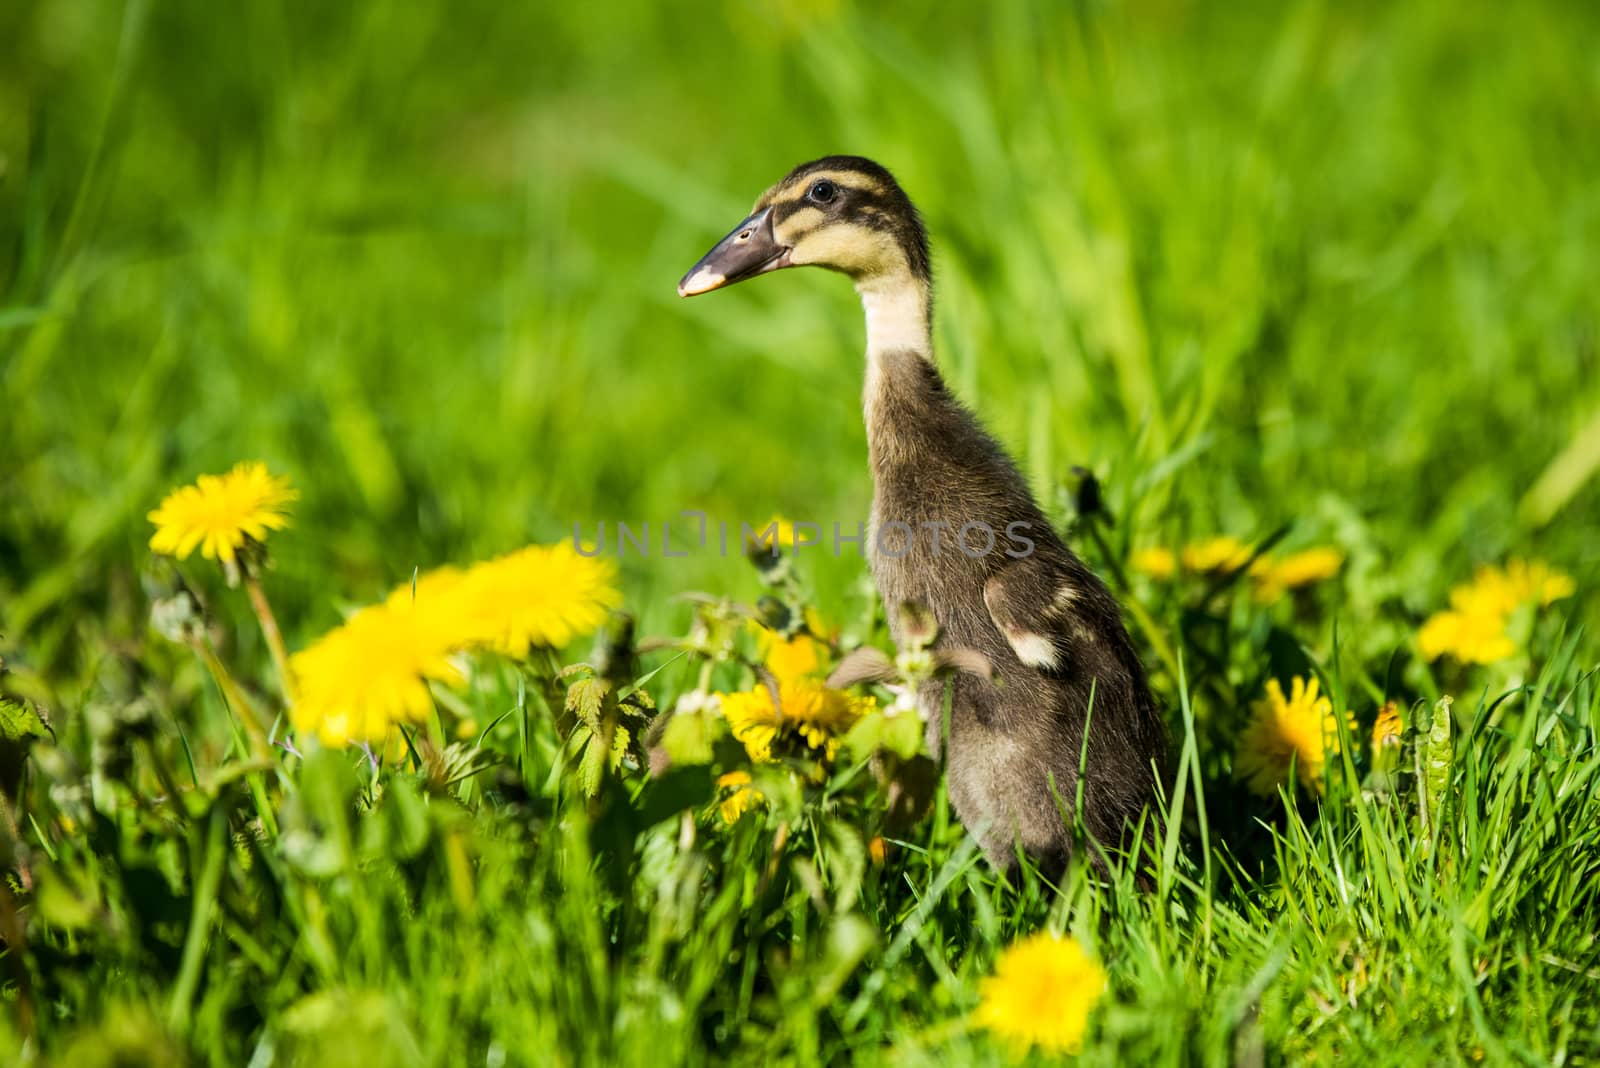 Little domestic gray duckling sitting in green grass with yellow dandelions.